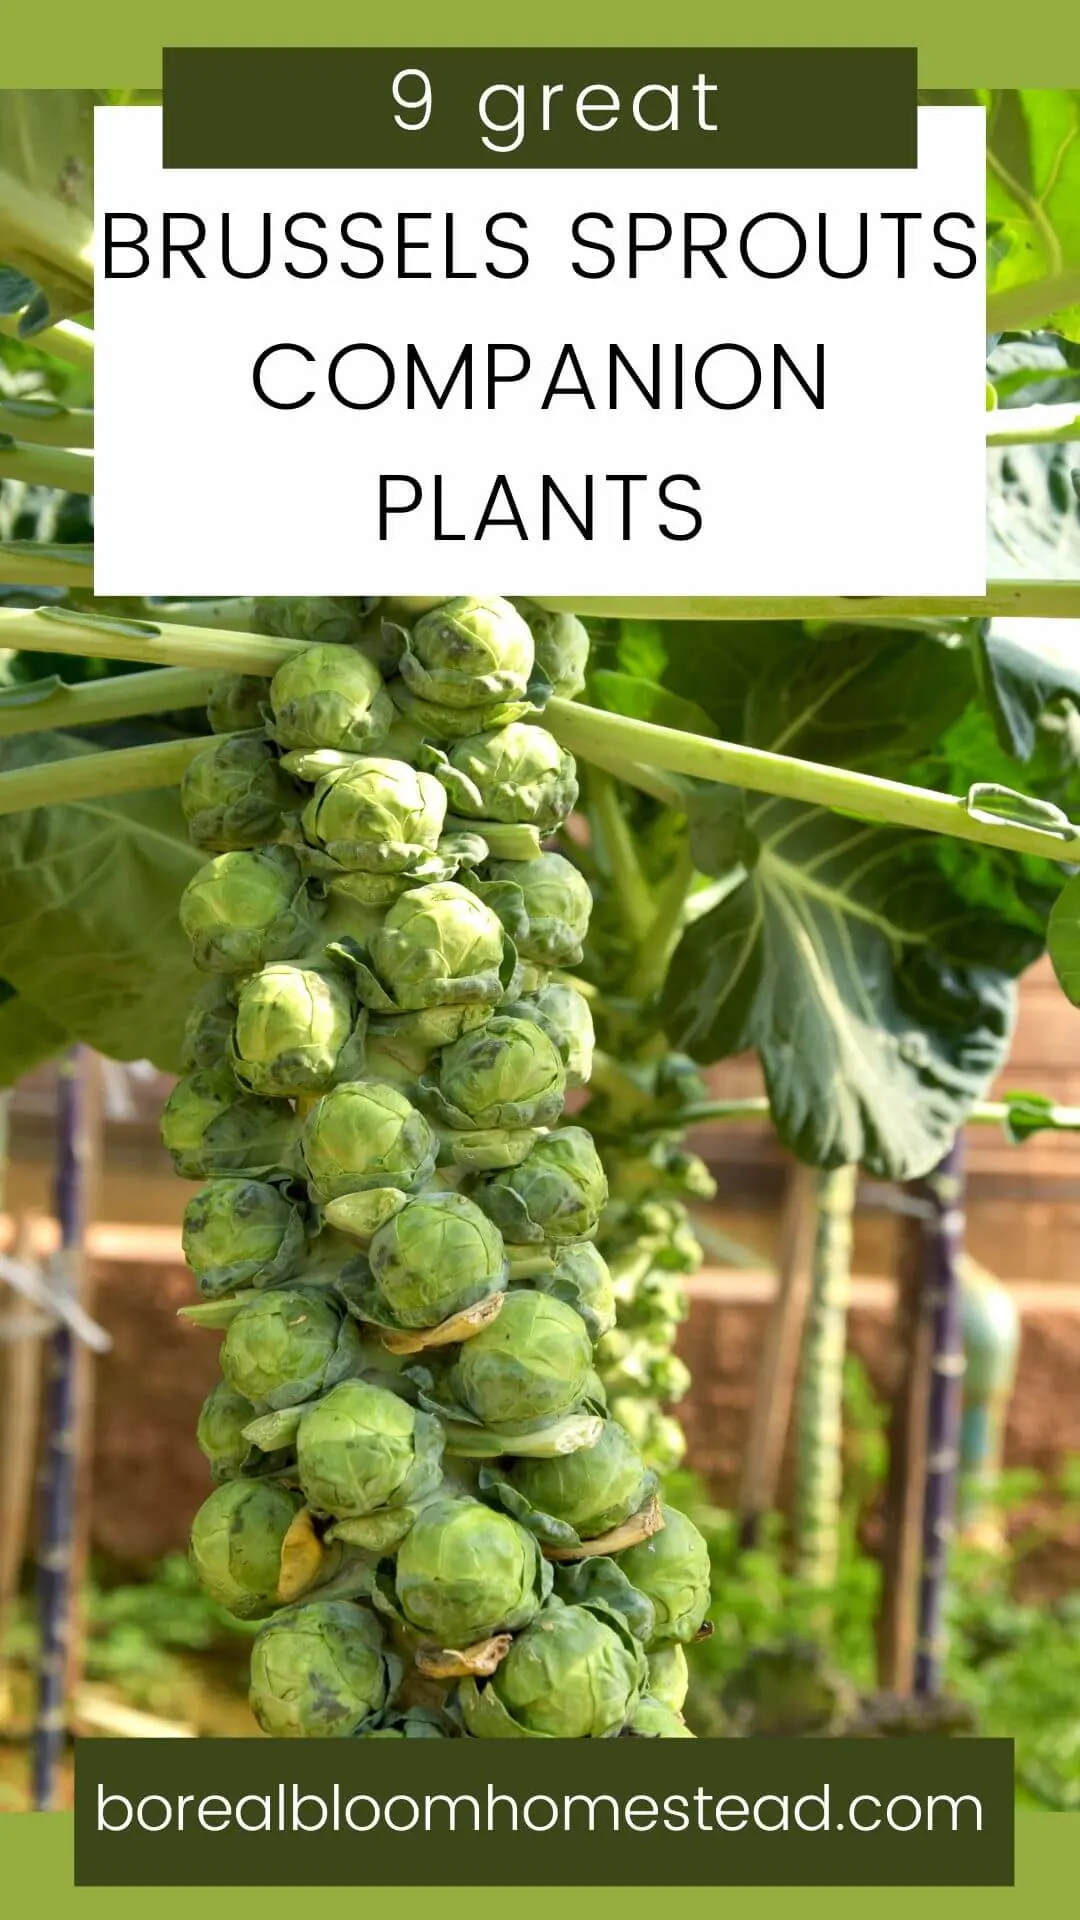 How many brussels sprouts do you get from one plant